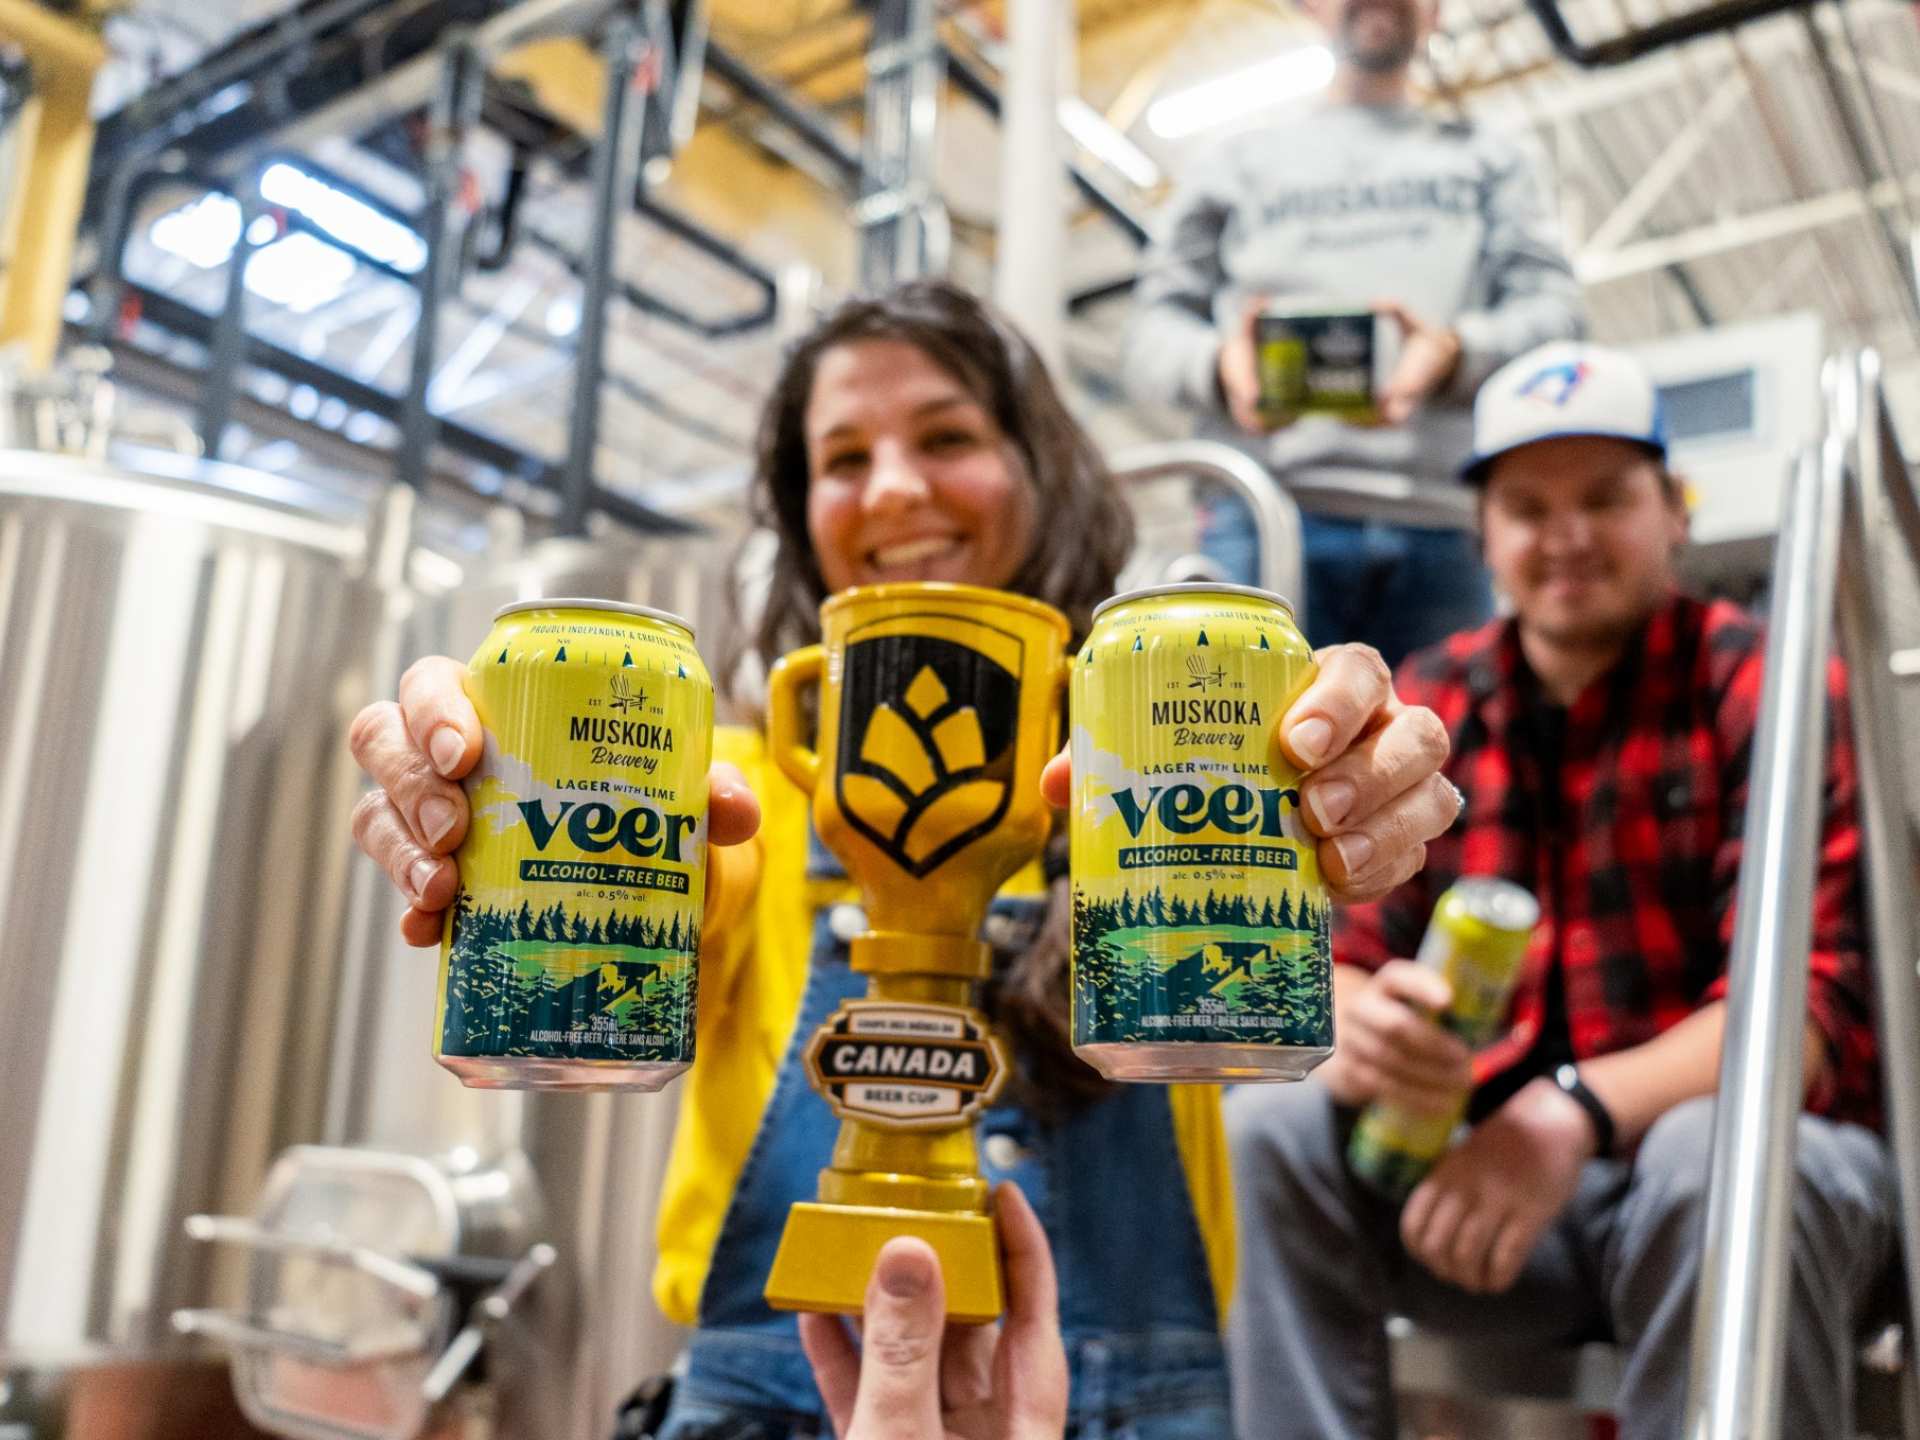 Brewers holding Veer non-alcoholic beer at Muskoka Brewery